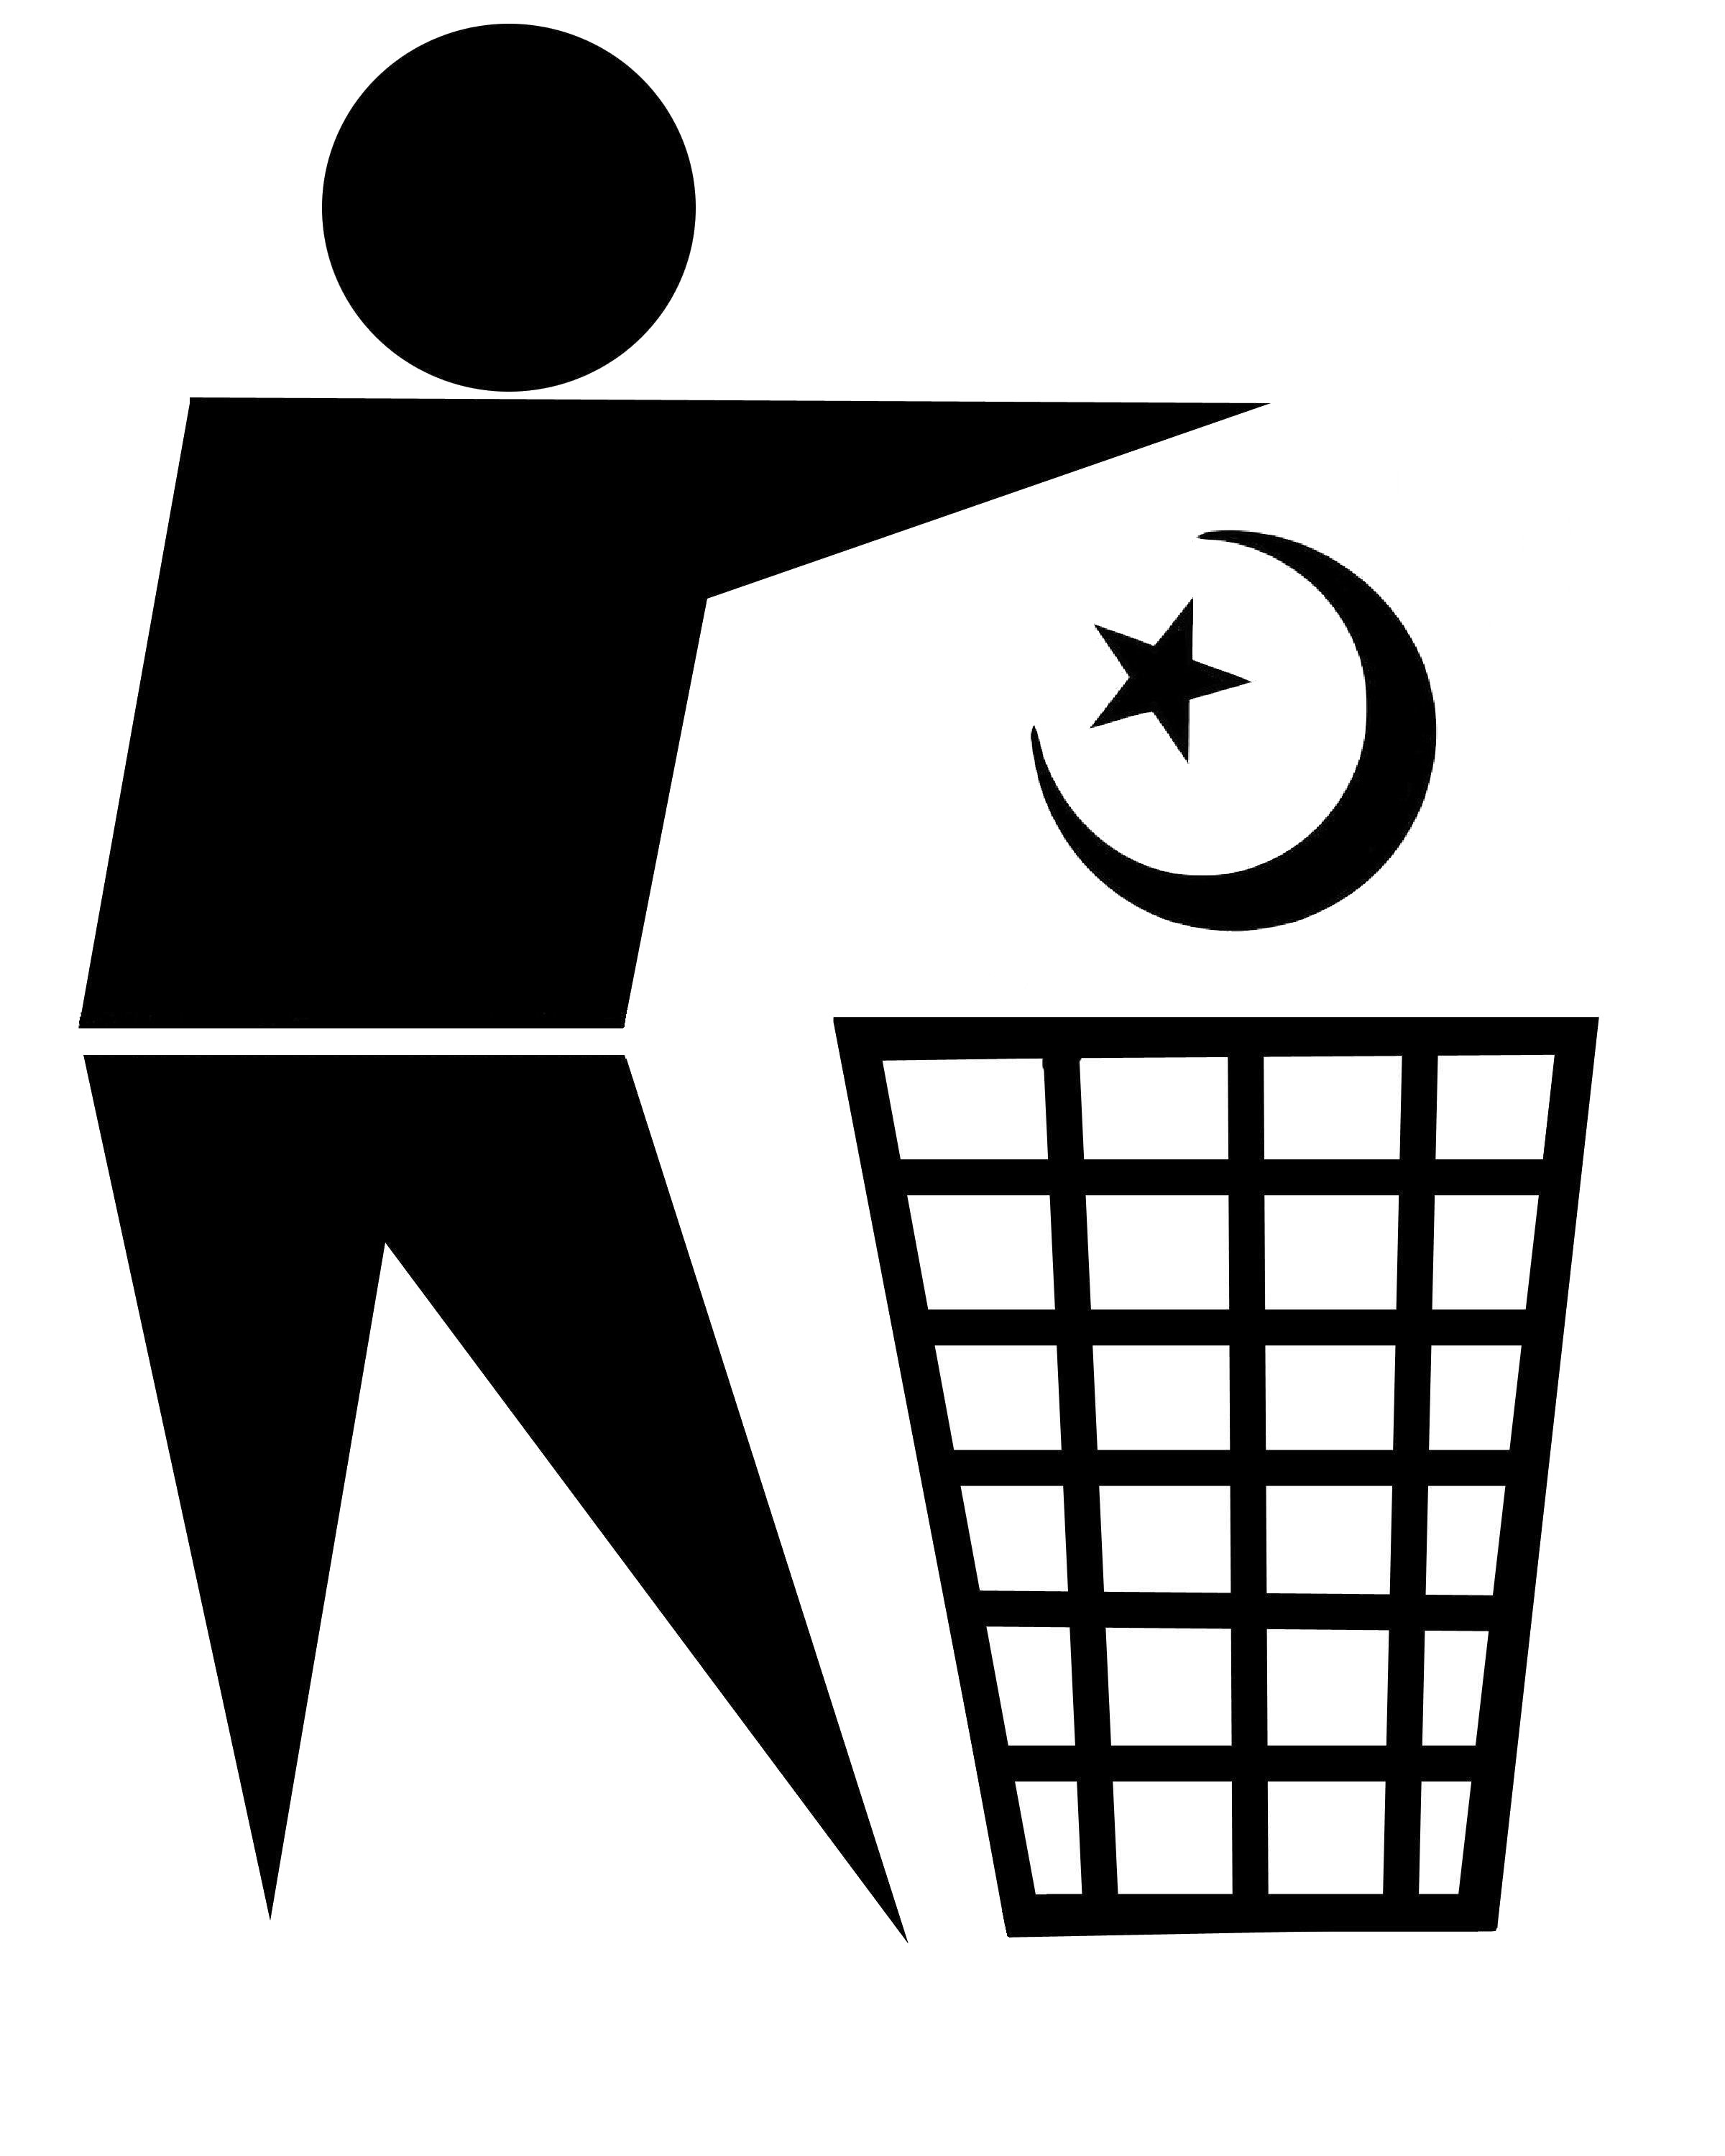 standard waste bin sign with Islamic religious symbol being discarded